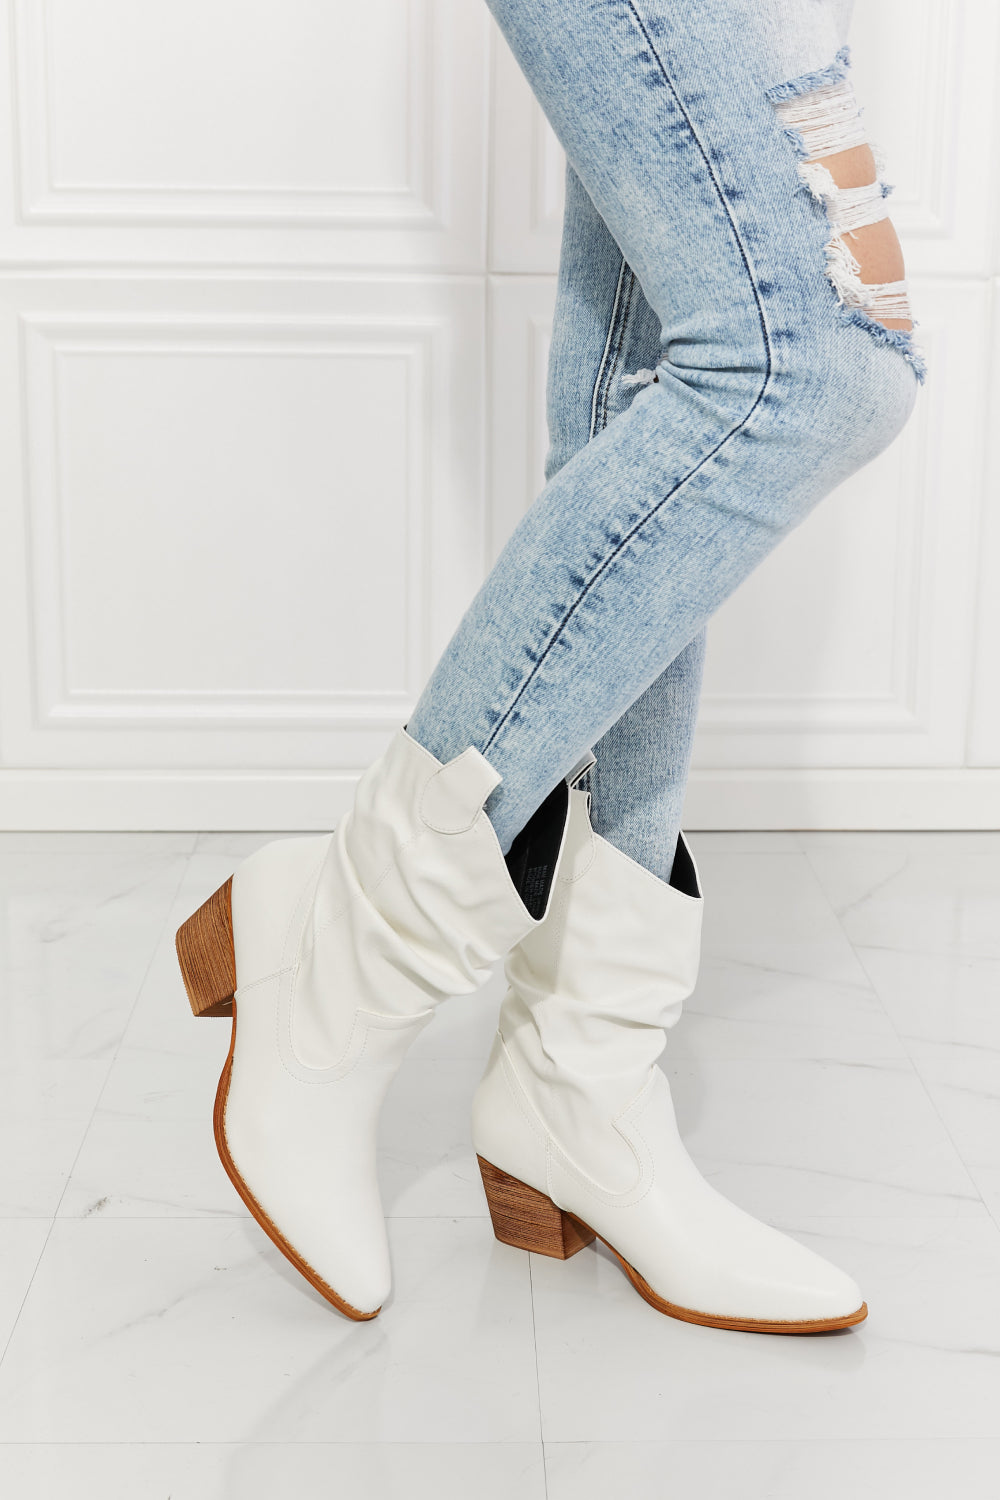 Women's White Boots Cowgirl Styled side view